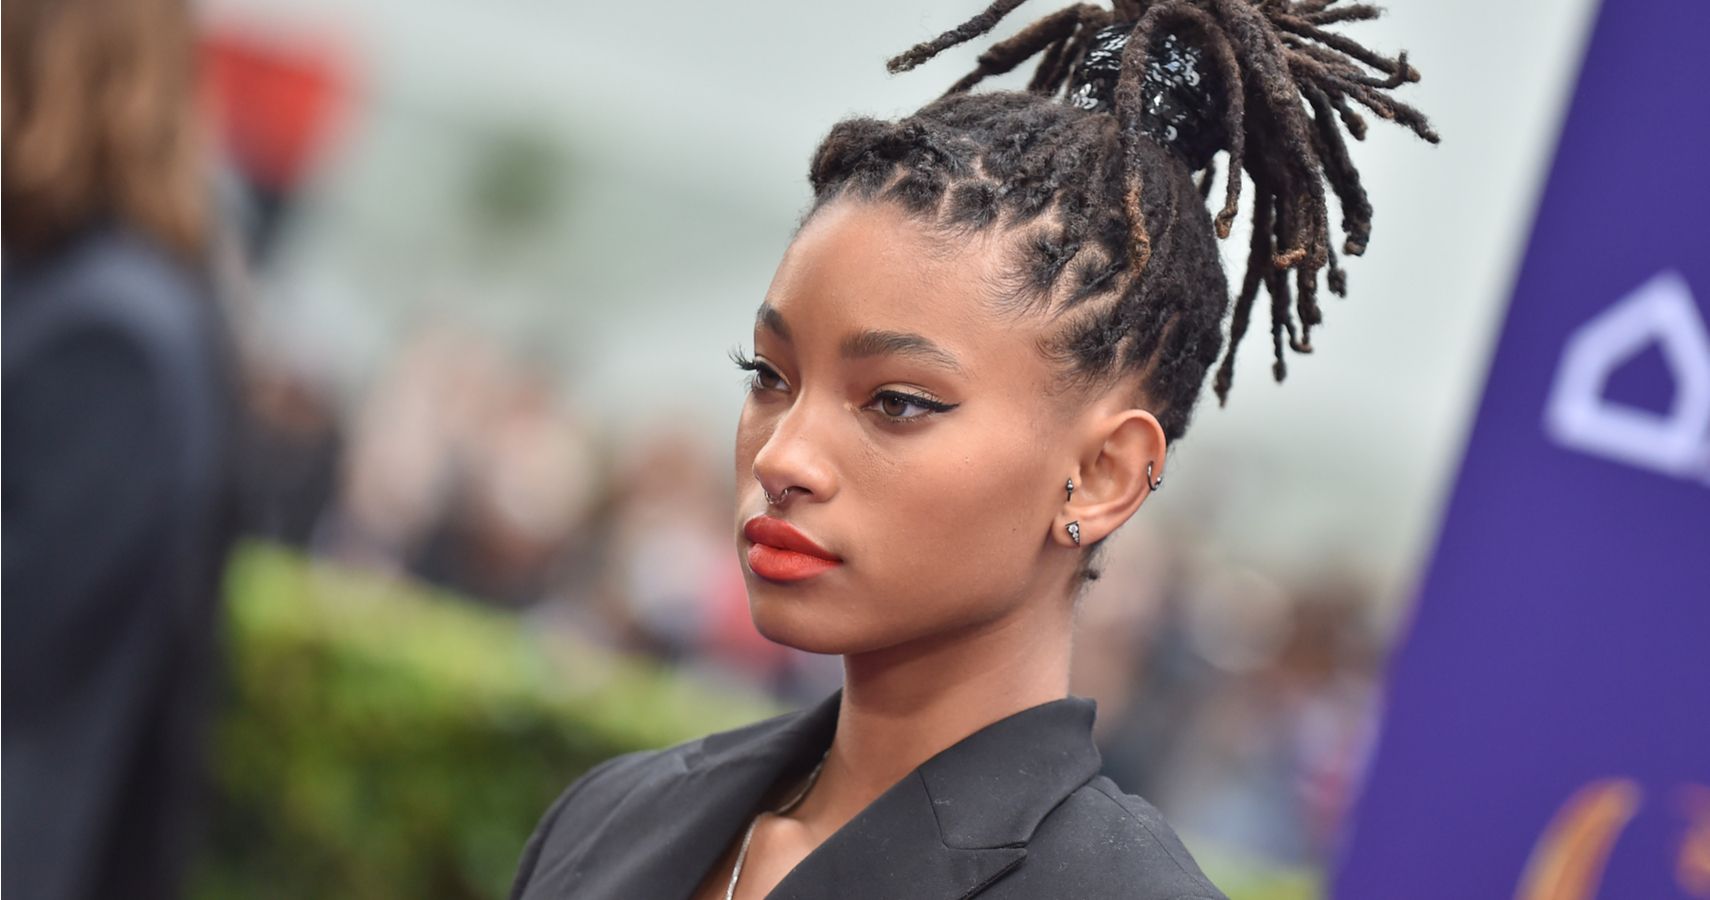 Willow Smith's Polyamorous Lifestyle Sparks A MultiGenerational Debate